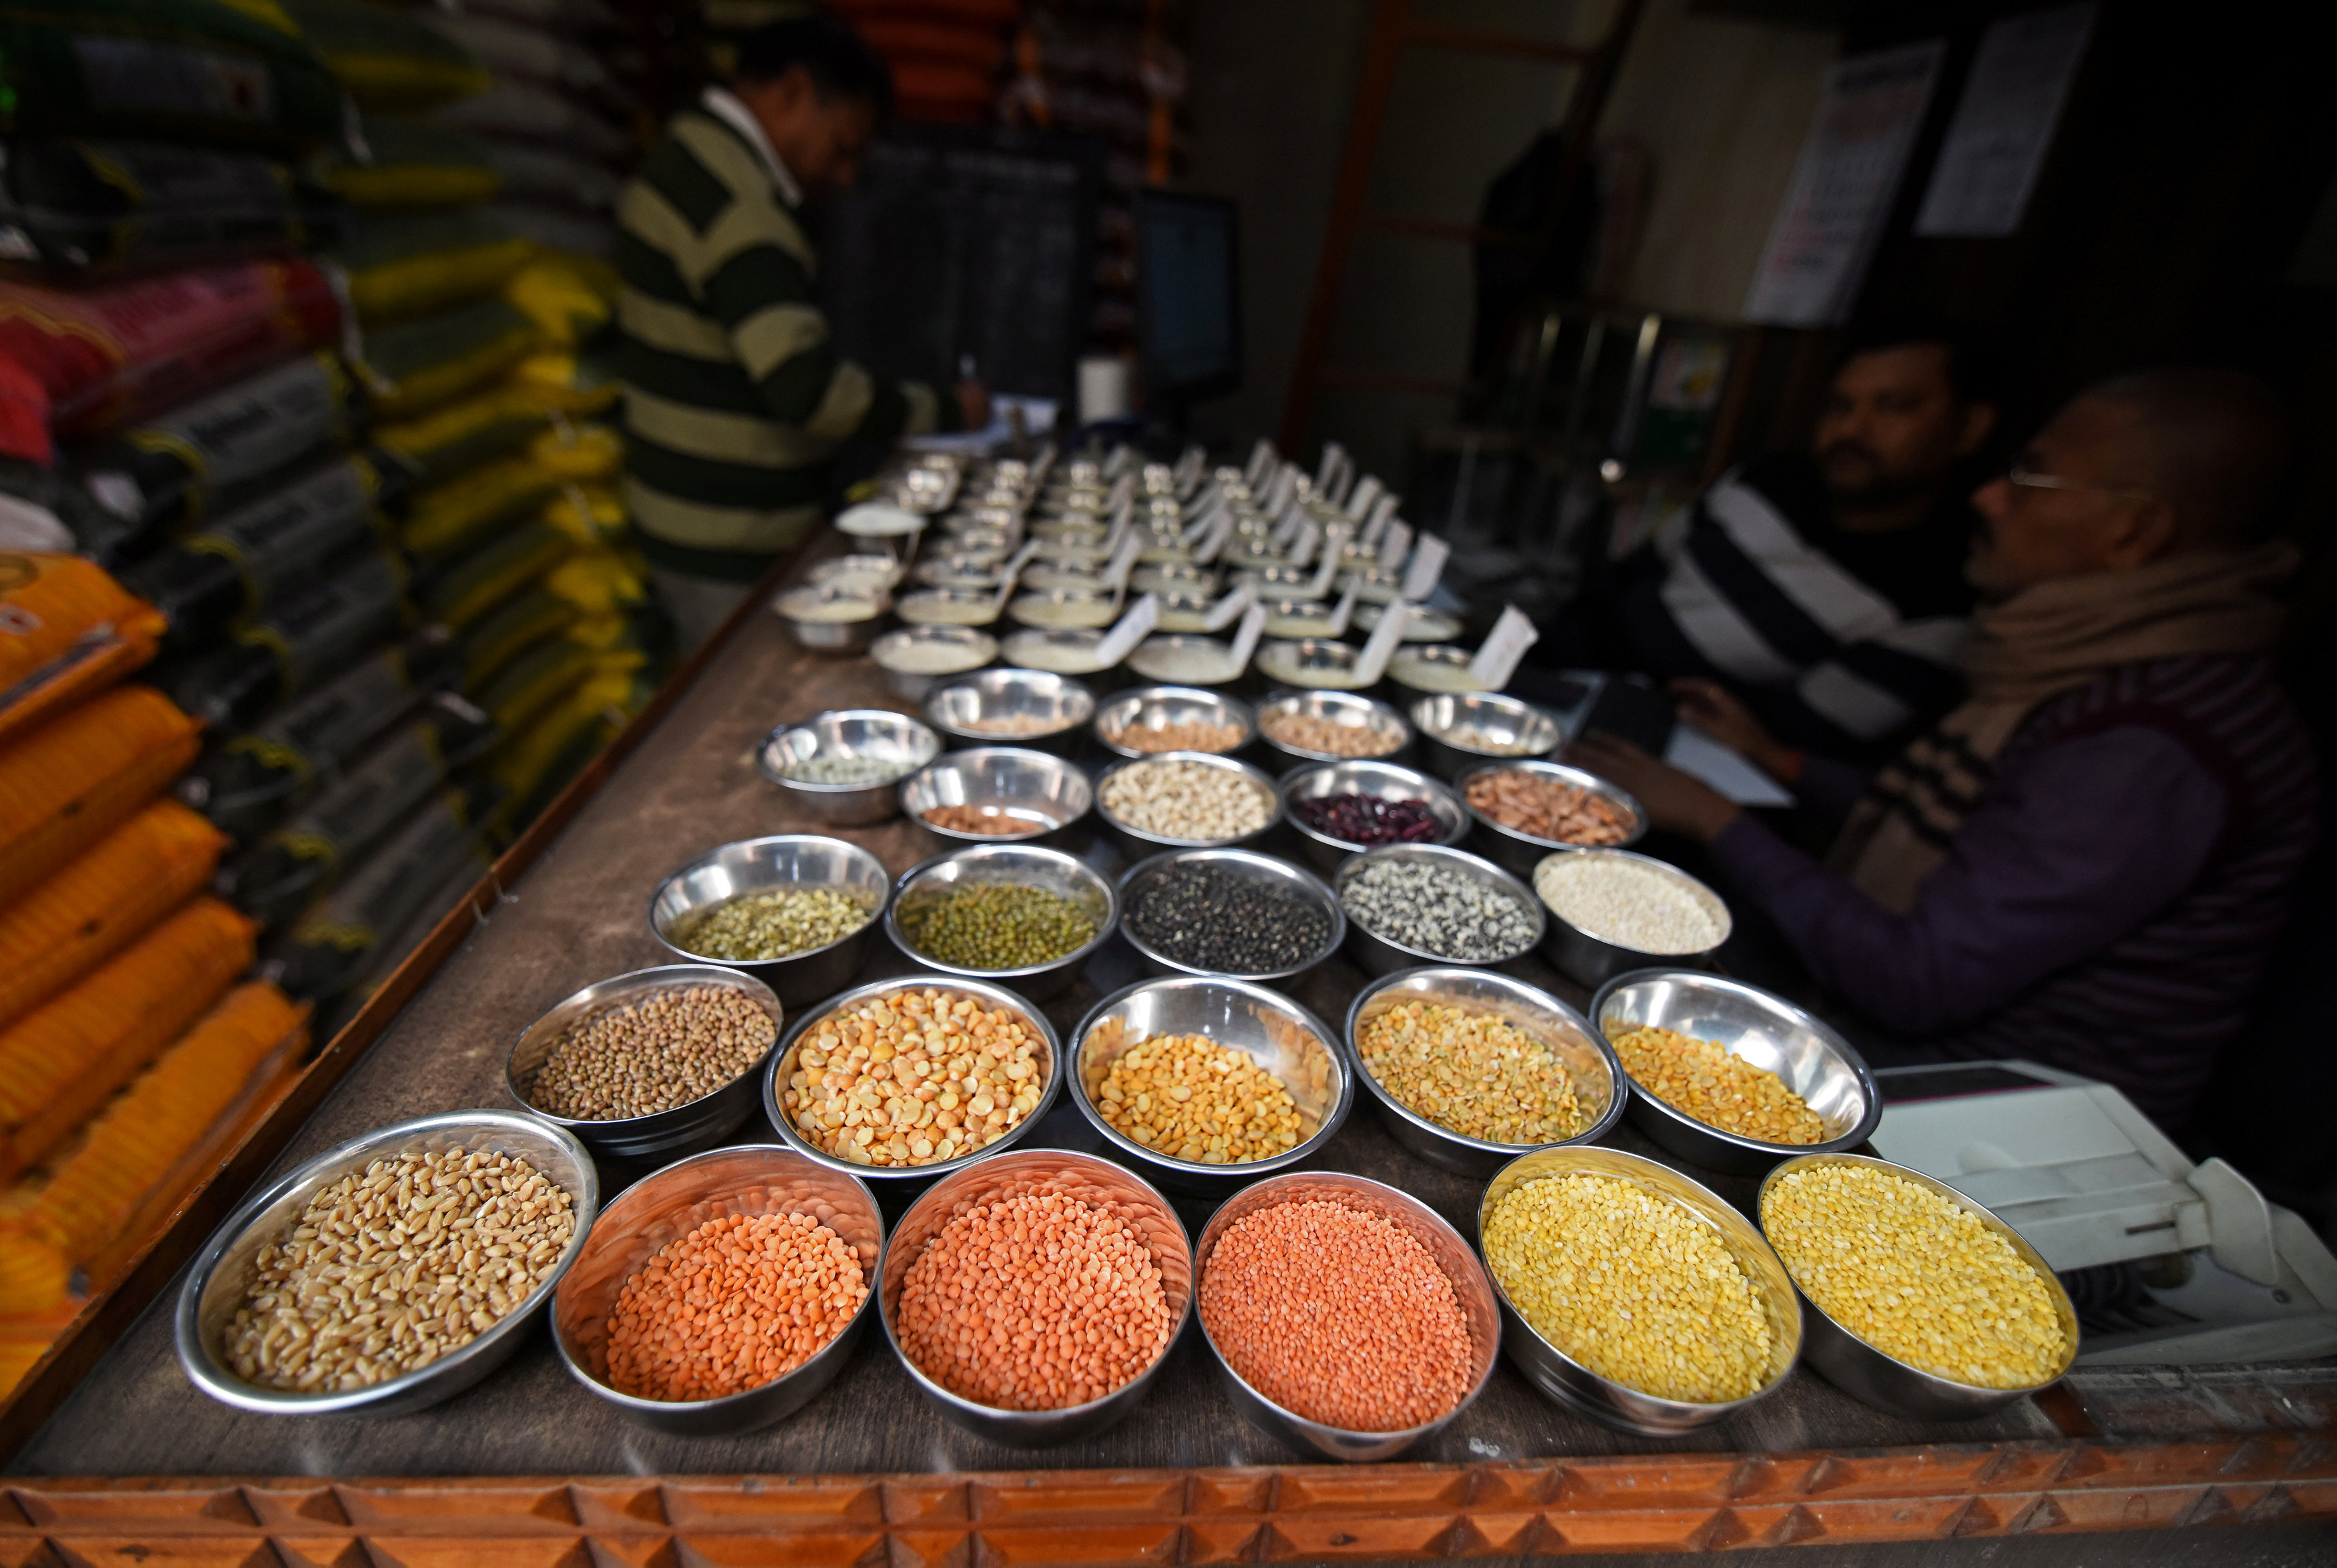 Pulses imports to India likely to fall lowest in two decades